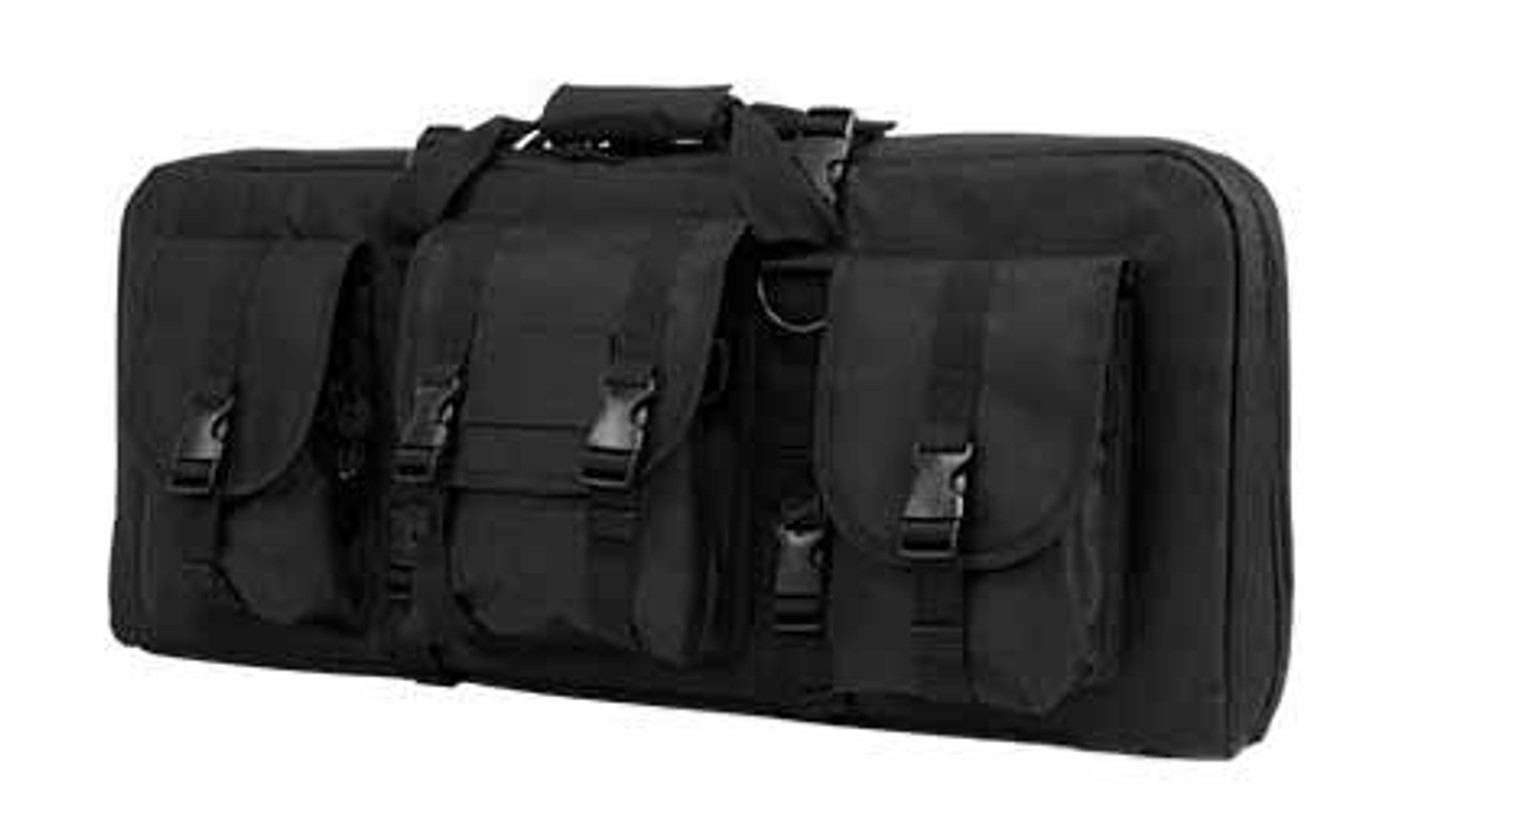 NcStar / VISM 28" Deluxe Dual Compartment Subgun / SBR Padded Carrying Bag / Case - Black